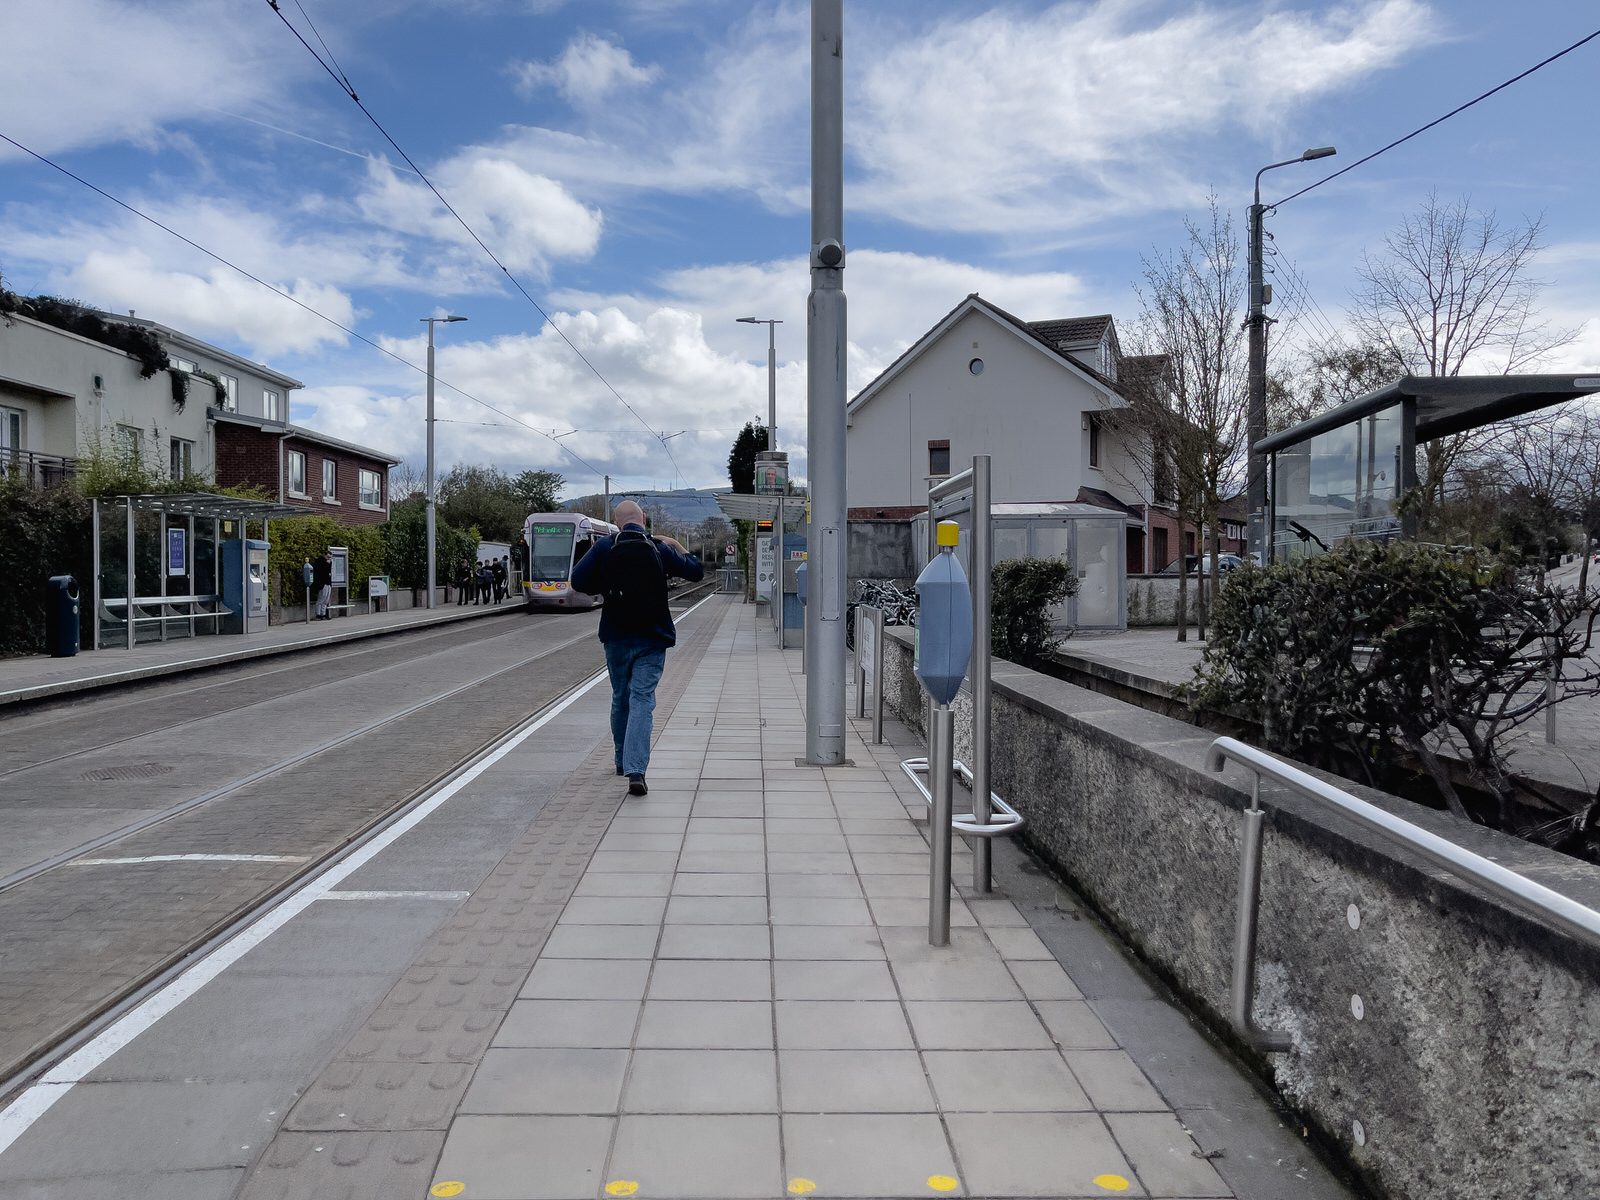 THE LUAS TRAM STOP AT WINDY ARBOUR AND THE IMMEDIATE AREA 024